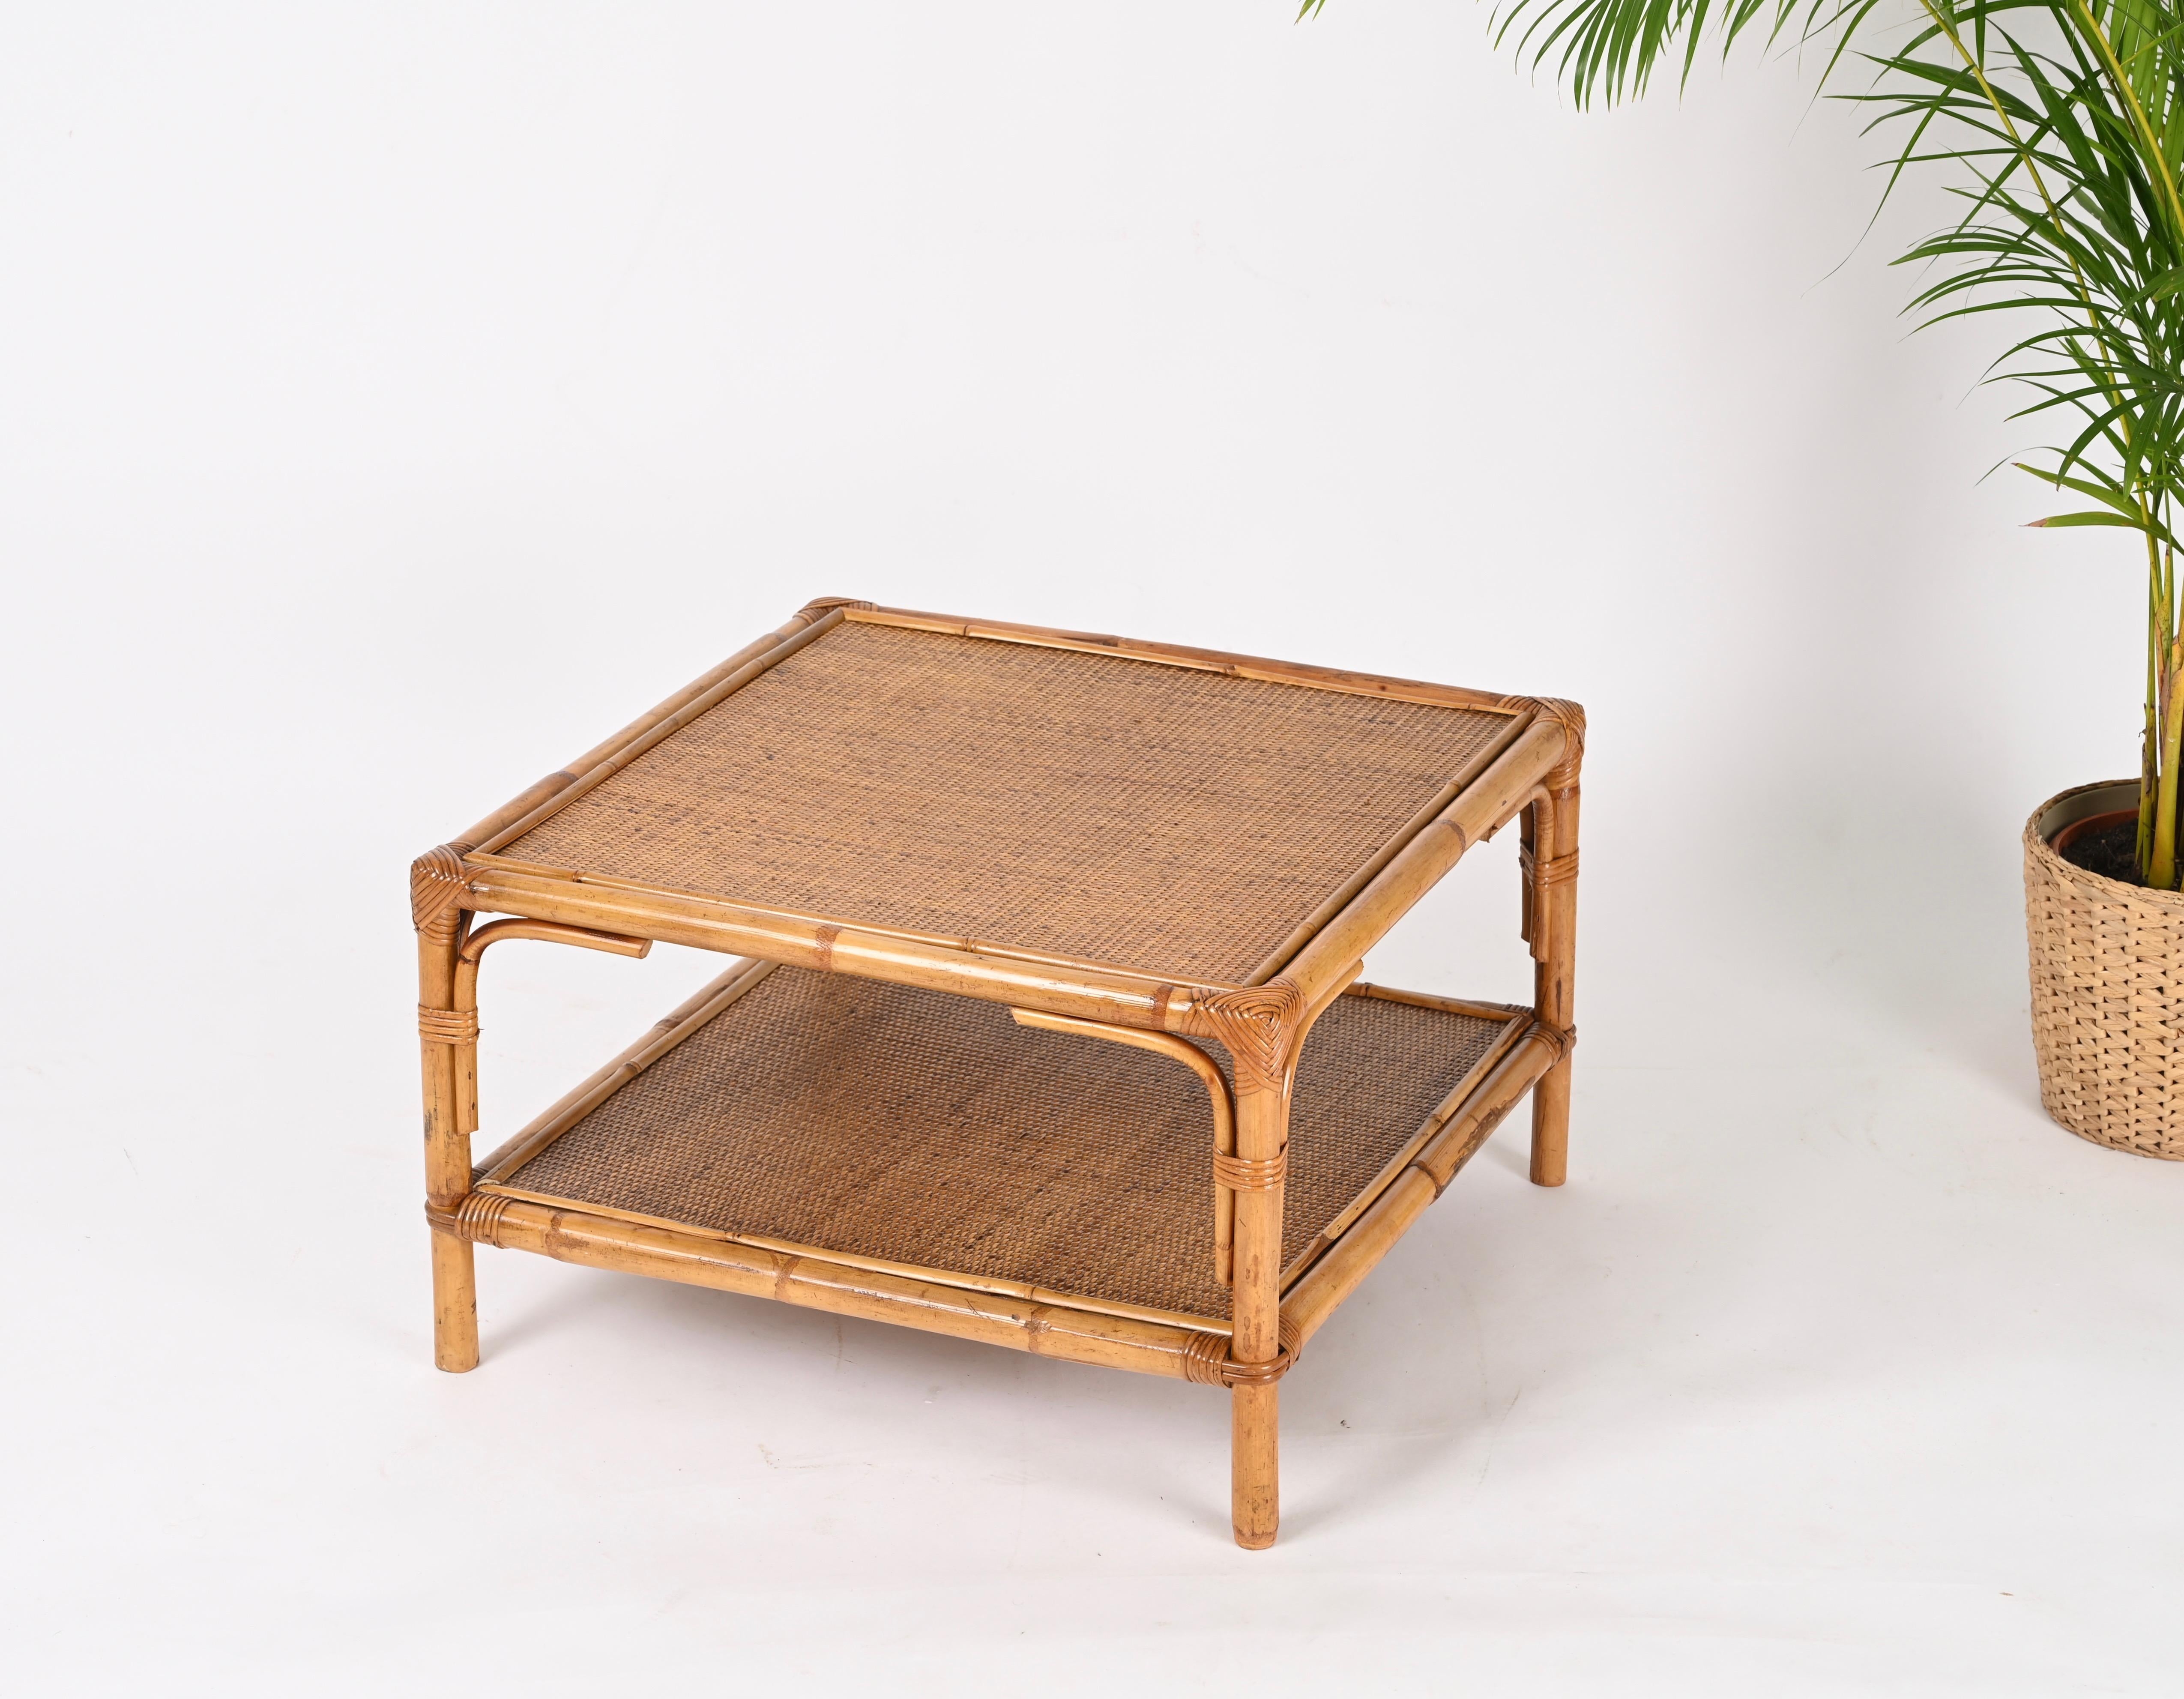 Vivai del Sud Midcentury Italian Square Coffee Table in Bamboo and Rattan, 1970s For Sale 6